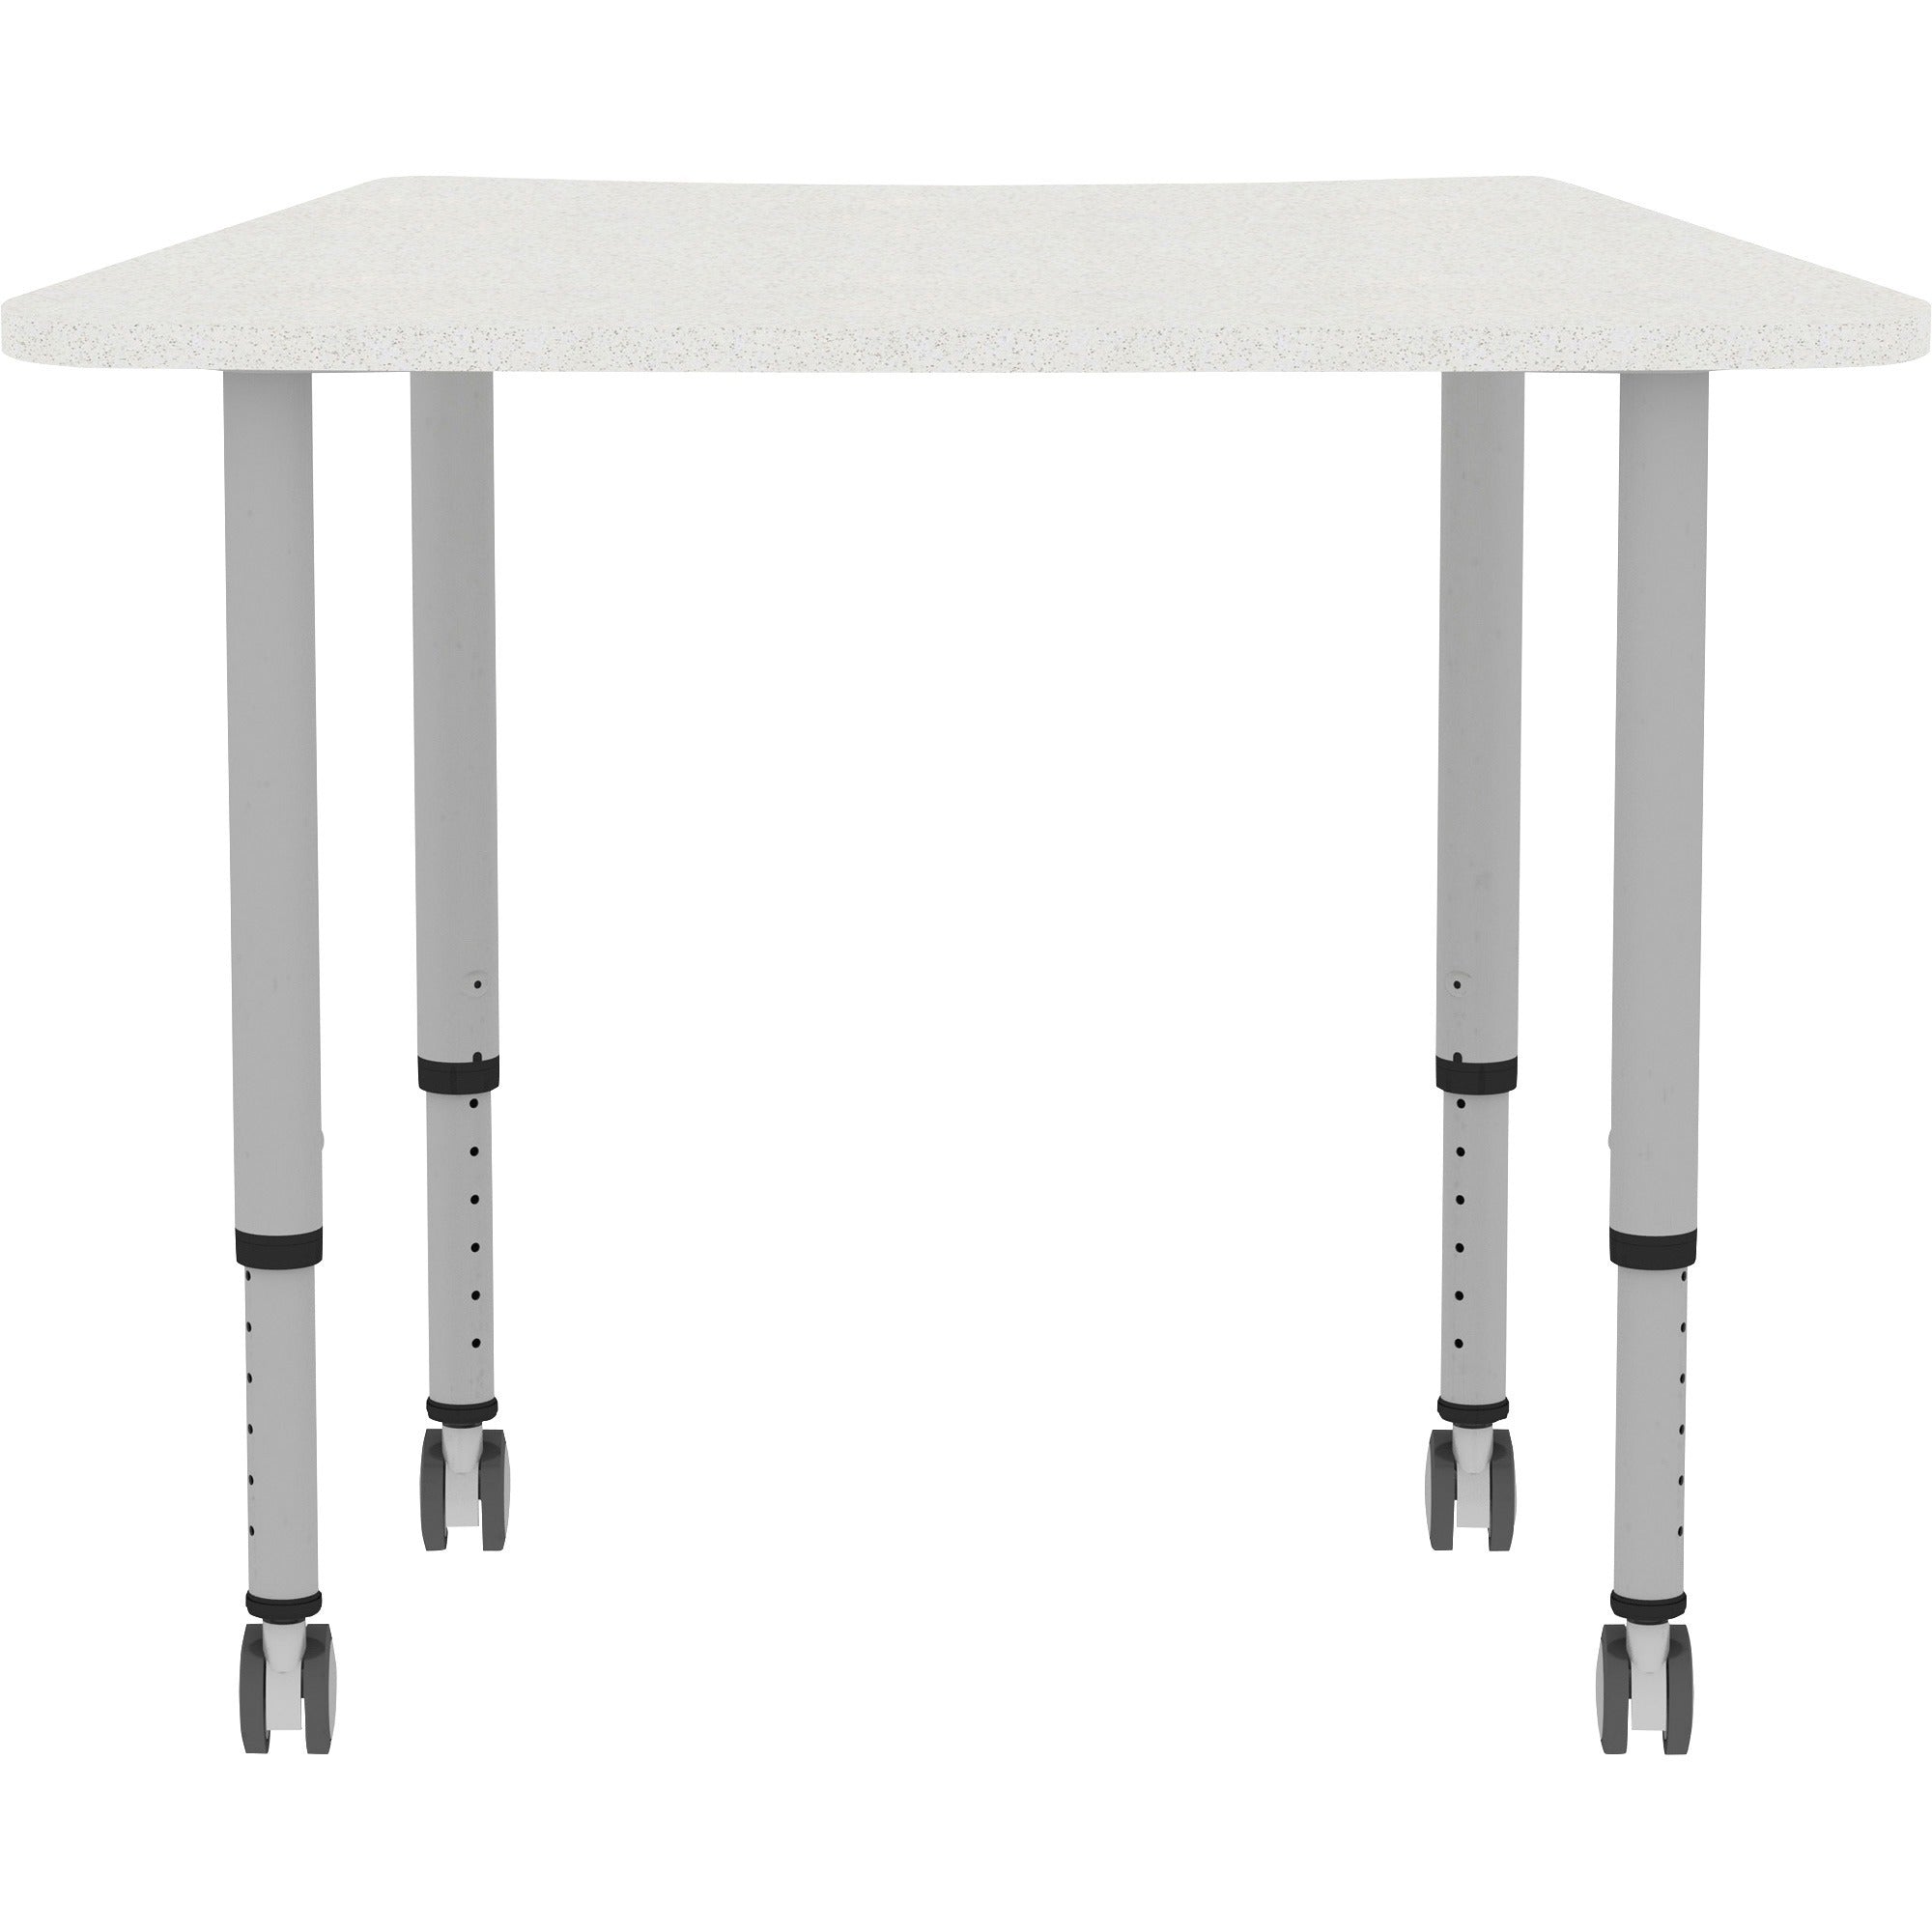 lorell-attune-height-adjustable-multipurpose-curved-table-for-table-toptrapezoid-top-adjustable-height-2662-to-3362-adjustment-x-60-table-top-width-x-2362-table-top-depth-3362-height-assembly-required-laminated-gray-laminate_llr69583 - 5